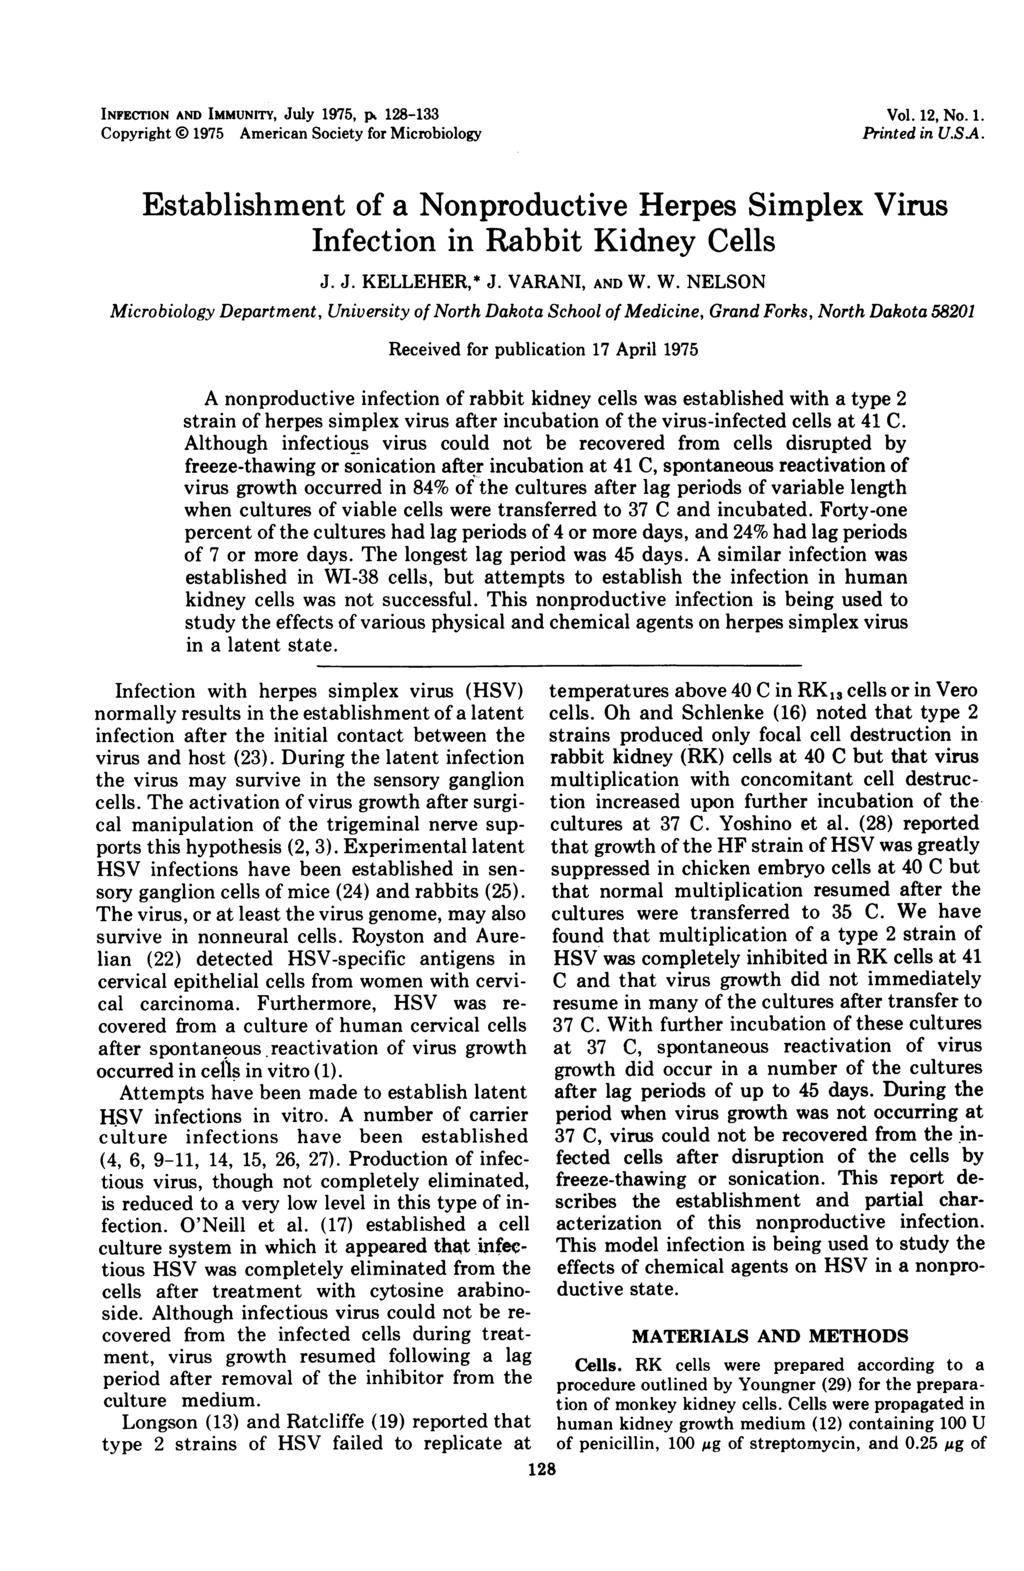 INFECTION AND IMMUNrrY, July 1975, p, 128-133 Copyright 0 1975 American Society for Microbiology Vol. 12, No. 1. Printed in U.SA.